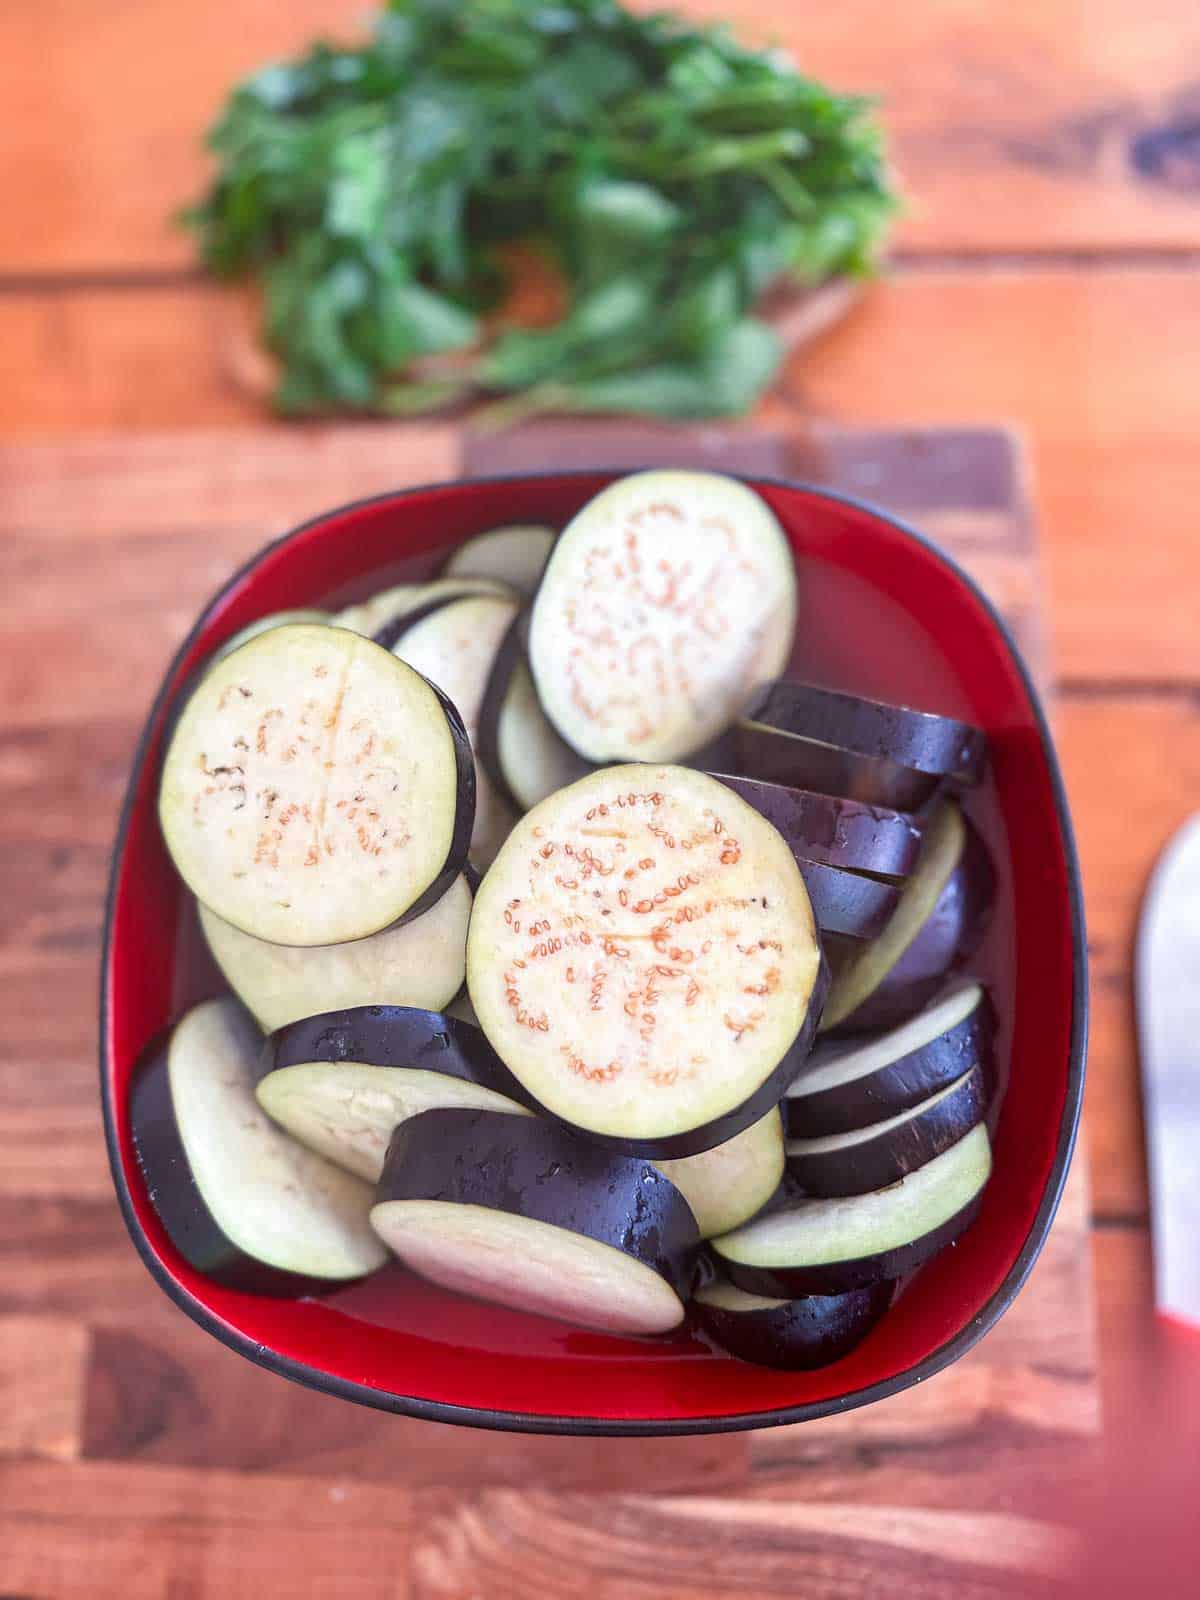 Sliced eggplants in a red bowl with water.